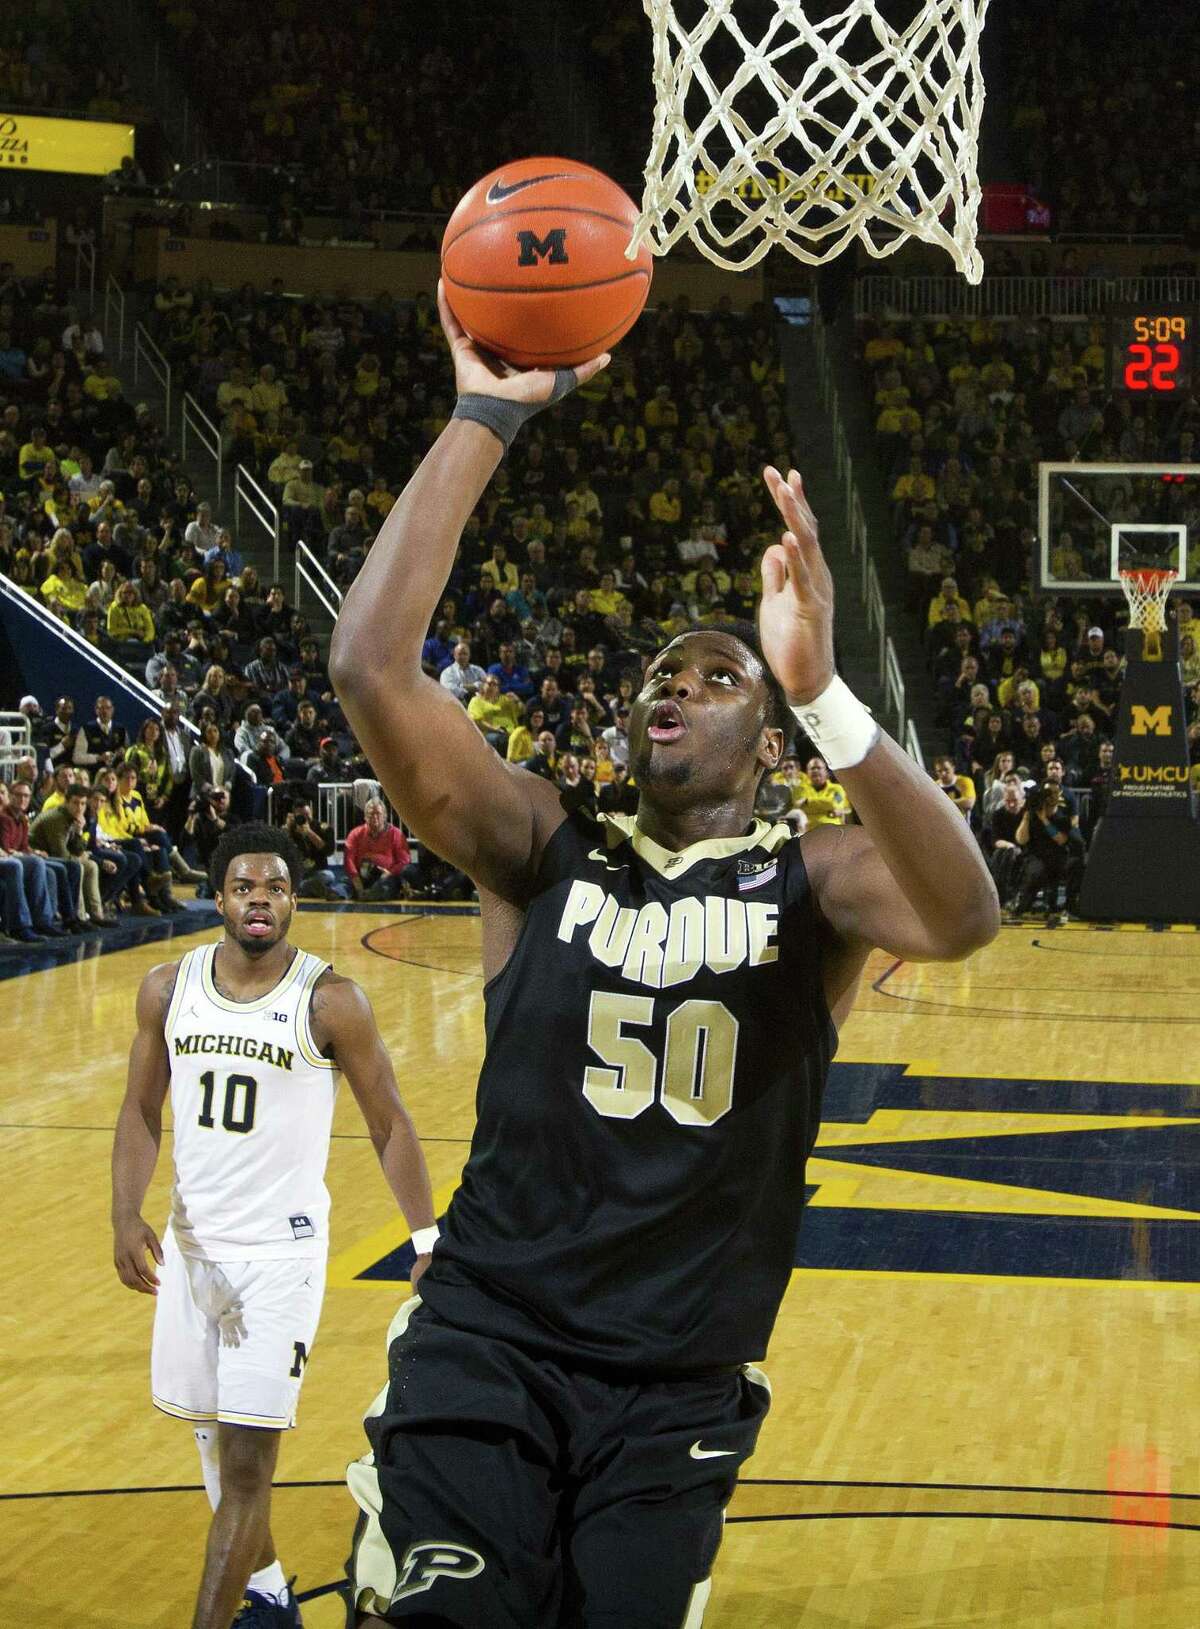 PURDUE: forward Caleb Swanigan (50) goes to the basket uncontested in the second half of an NCAA college basketball game against Michigan at Crisler Center in Ann Arbor, Mich., Saturday, Feb. 25, 2017. Michigan won 82-70. (AP Photo/Tony Ding)